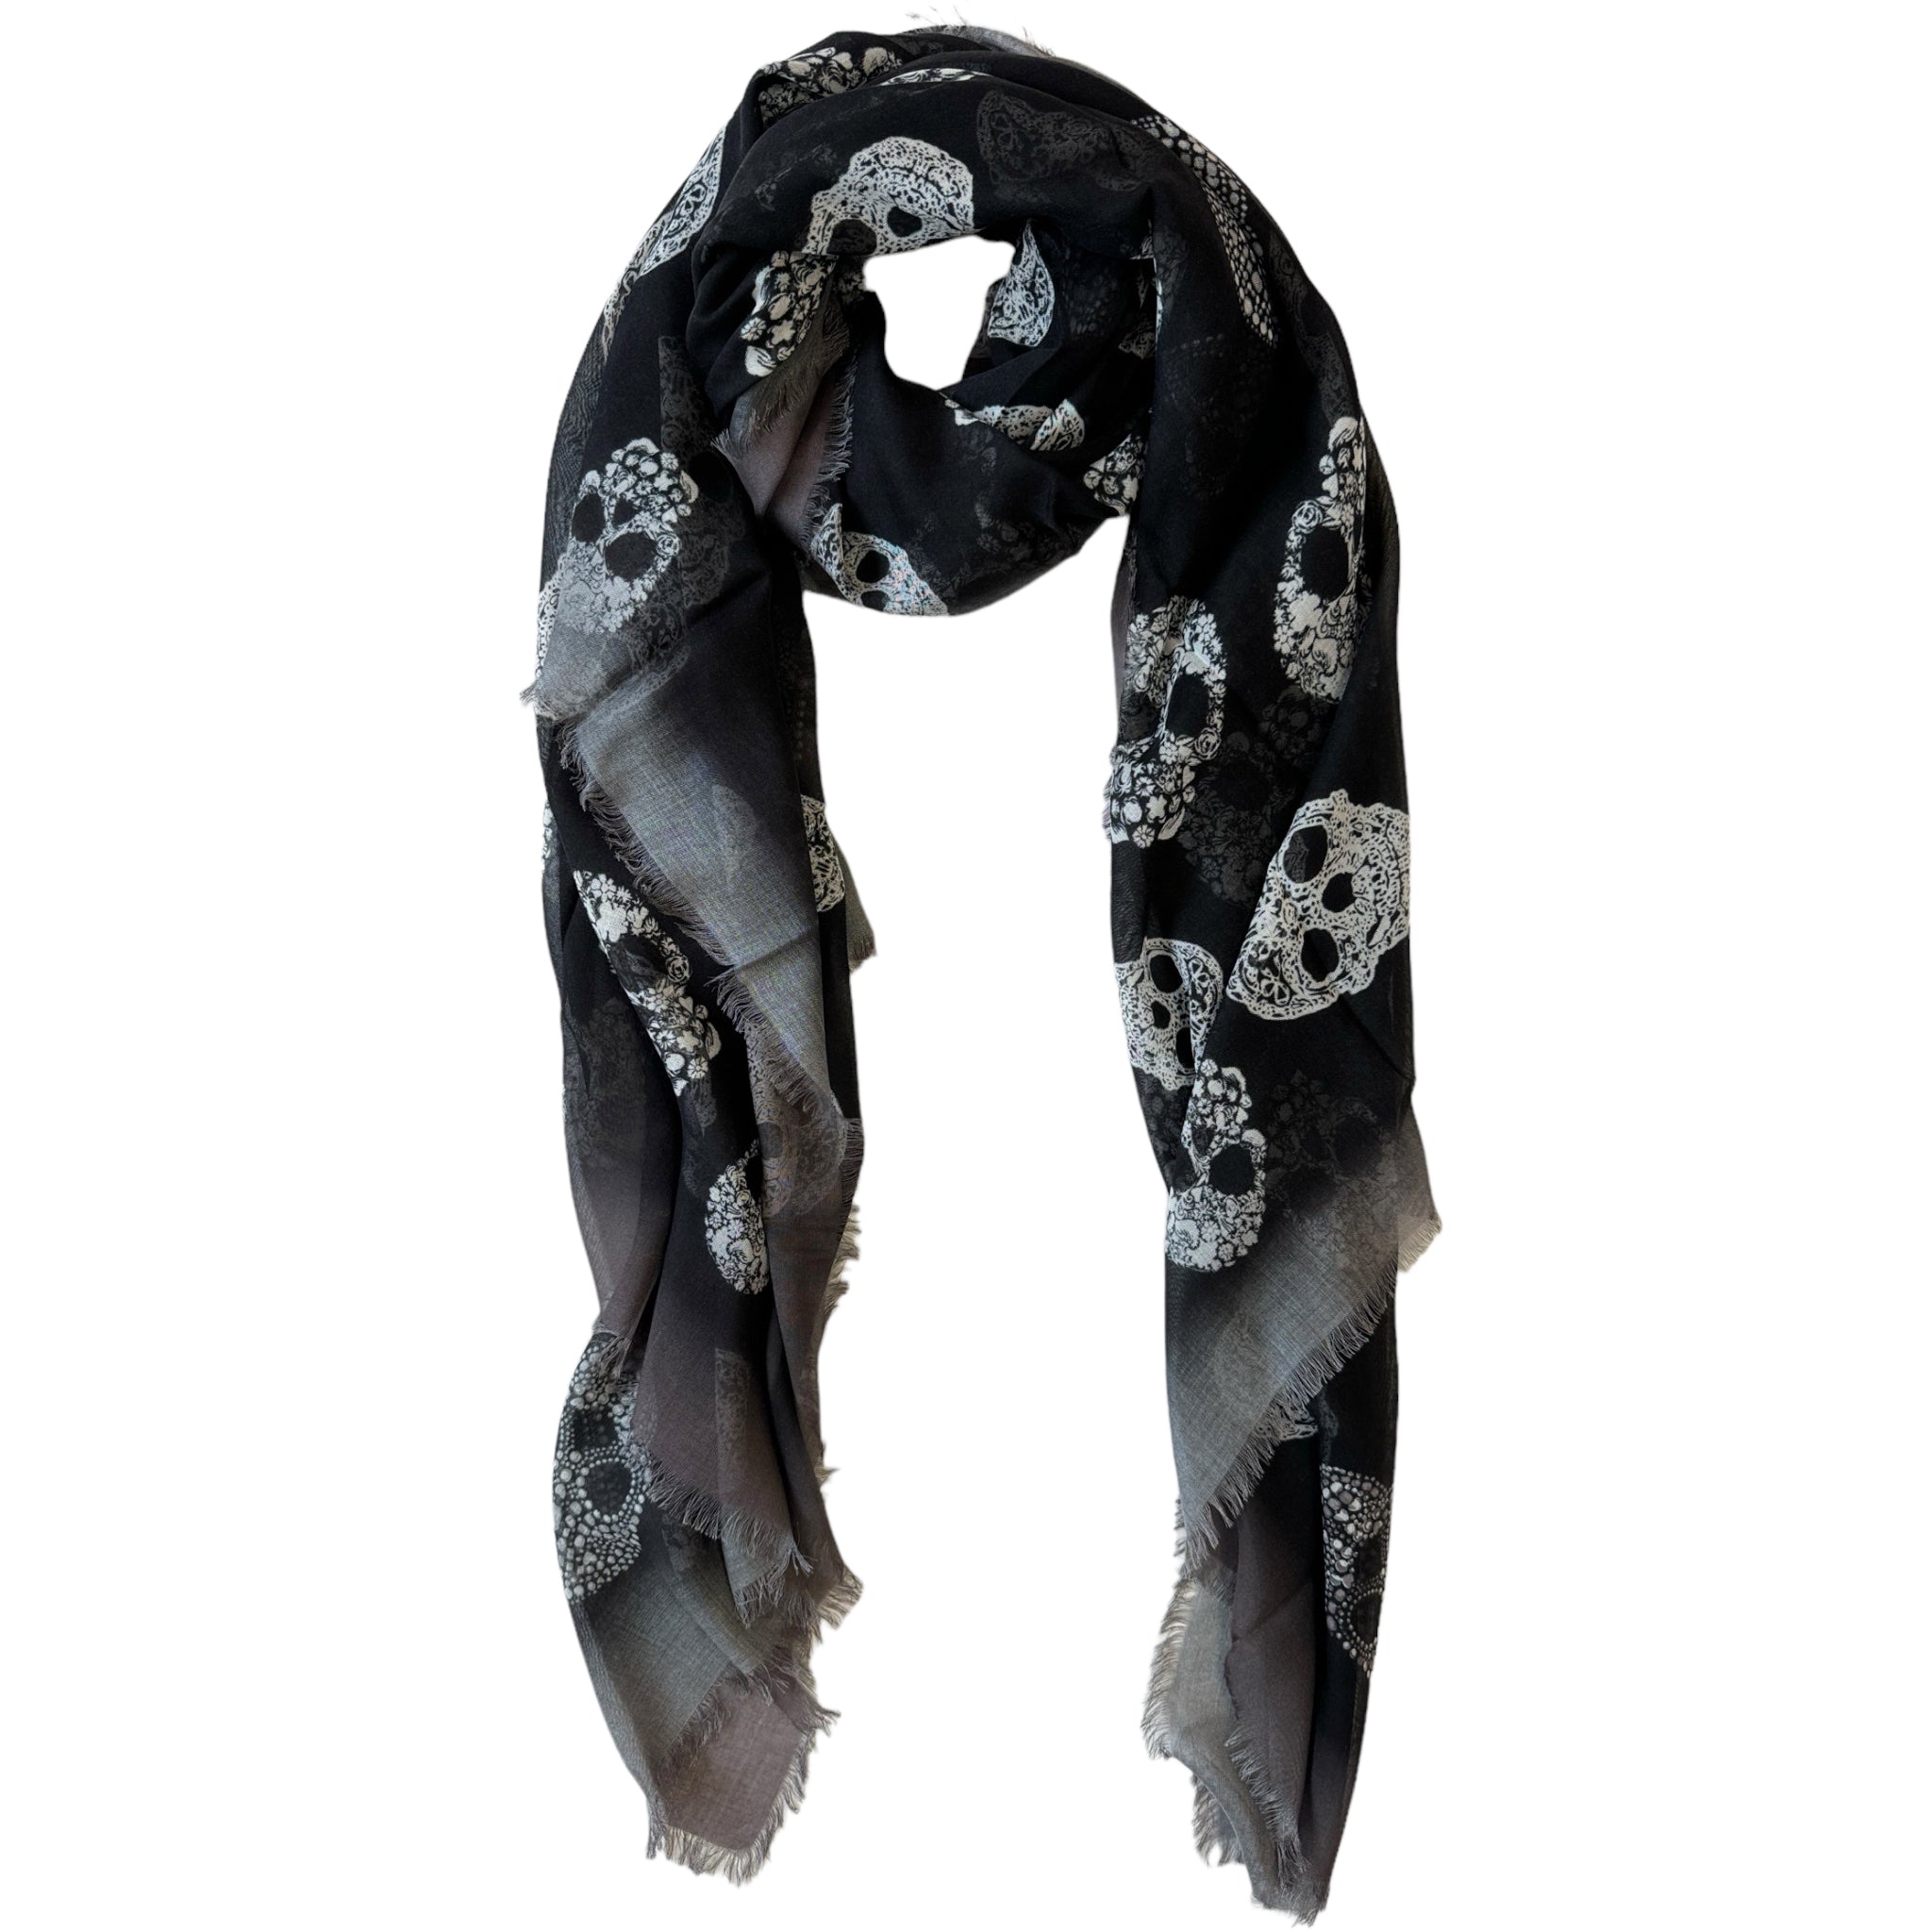 Blue Pacific Modal and Silk Frida Skull Ombre Scarf in Black and Gray Border